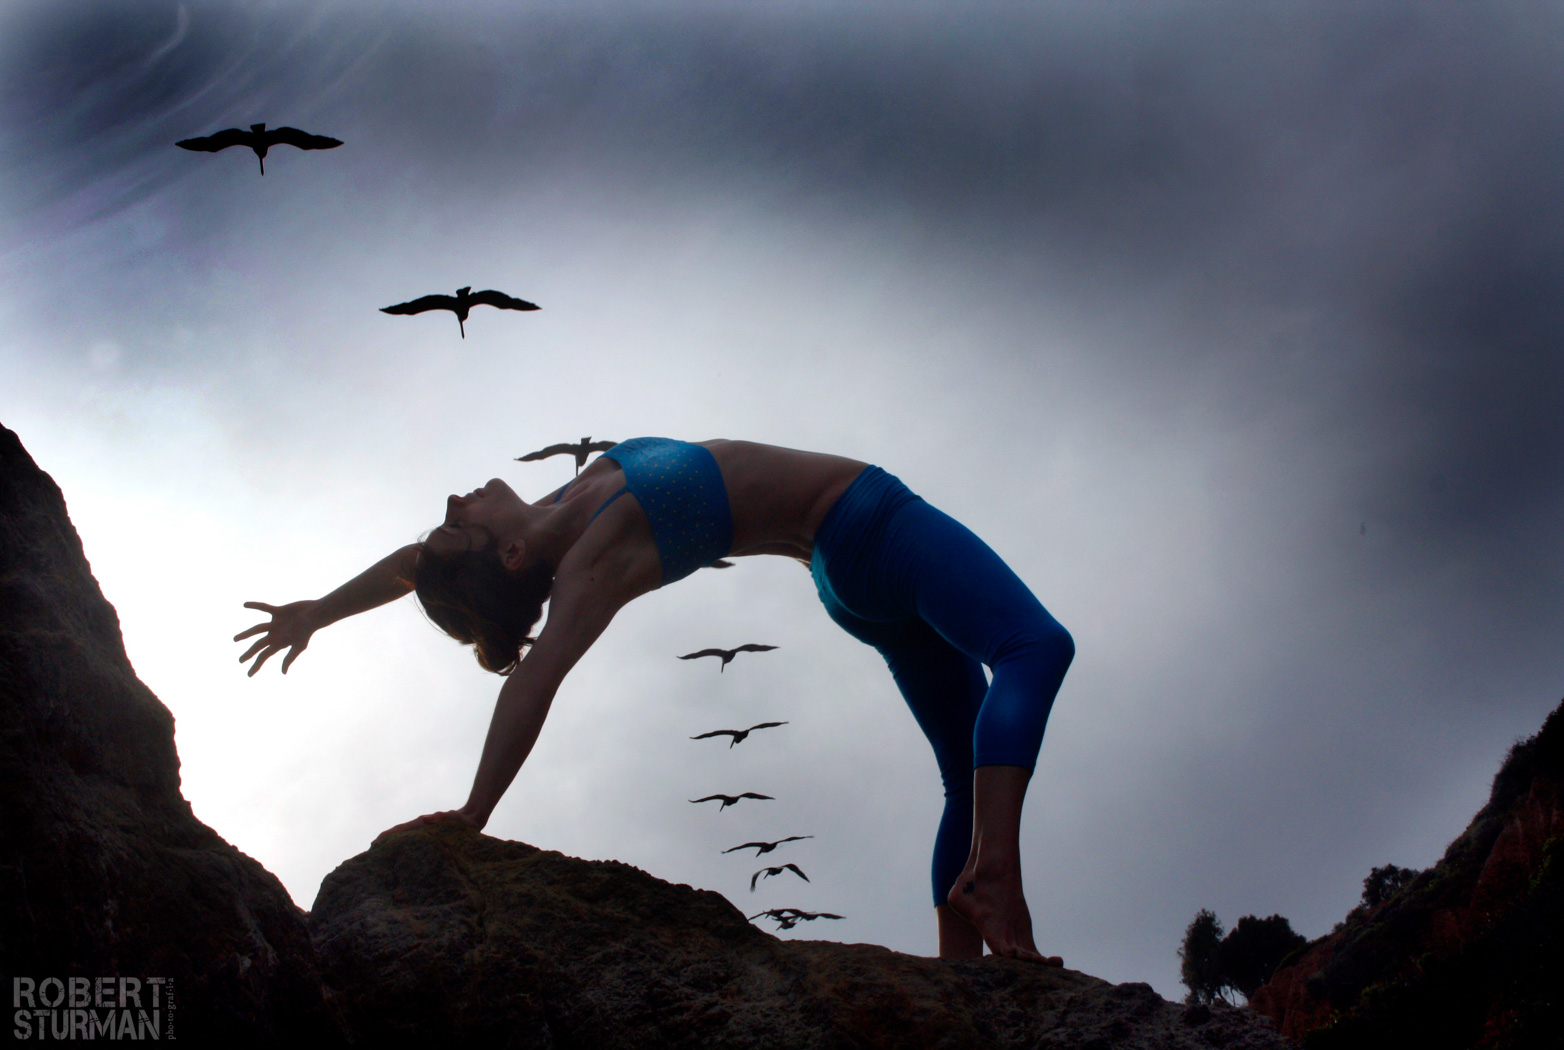 View of a woman doing a yoga pose on a rock and some birds flying at the background